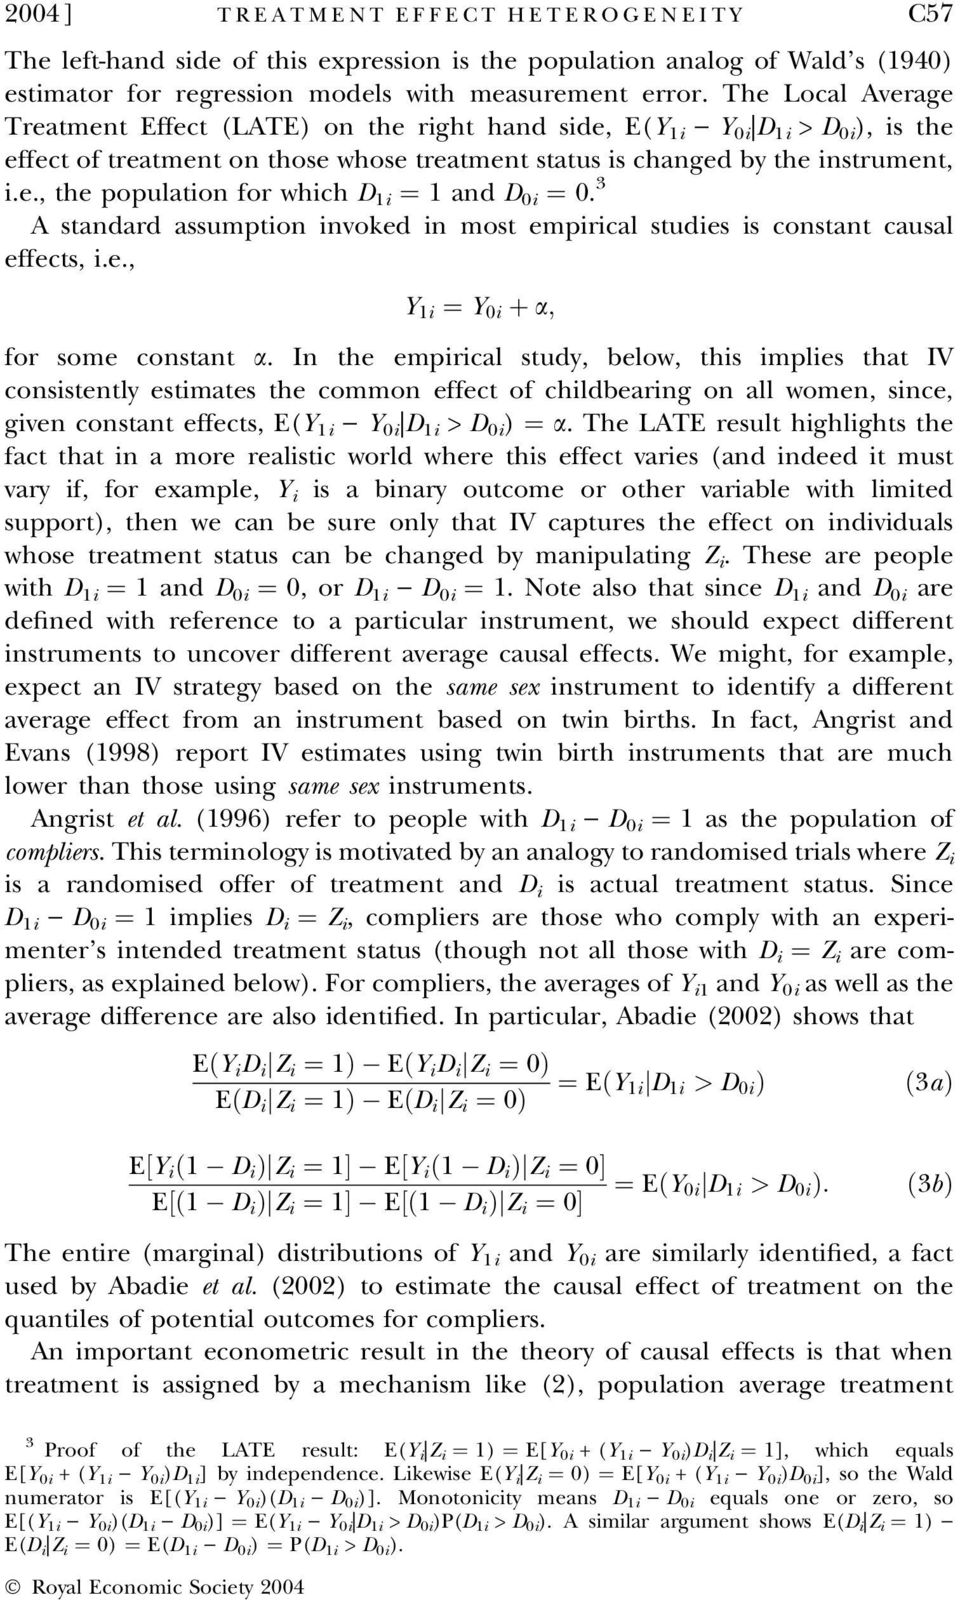 3 A standard assumption invoked in most empirical studies is constant causal effects, i.e., Y 1i ¼ Y 0i þ a; for some constant a.